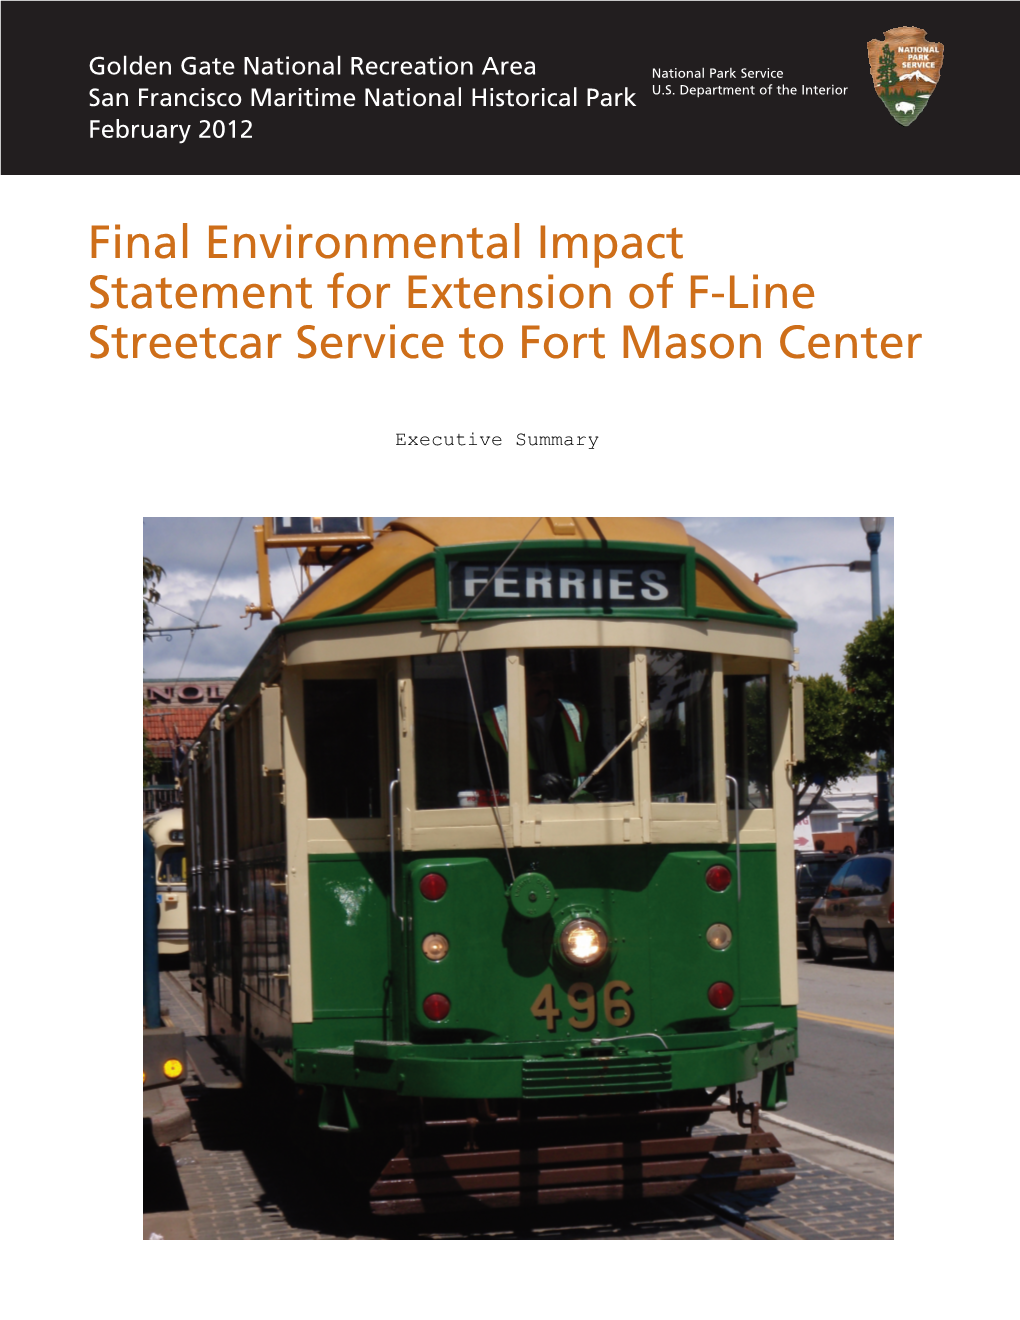 Final Environmental Impact Statement for Extension of F-Line Streetcar Service to Fort Mason Center